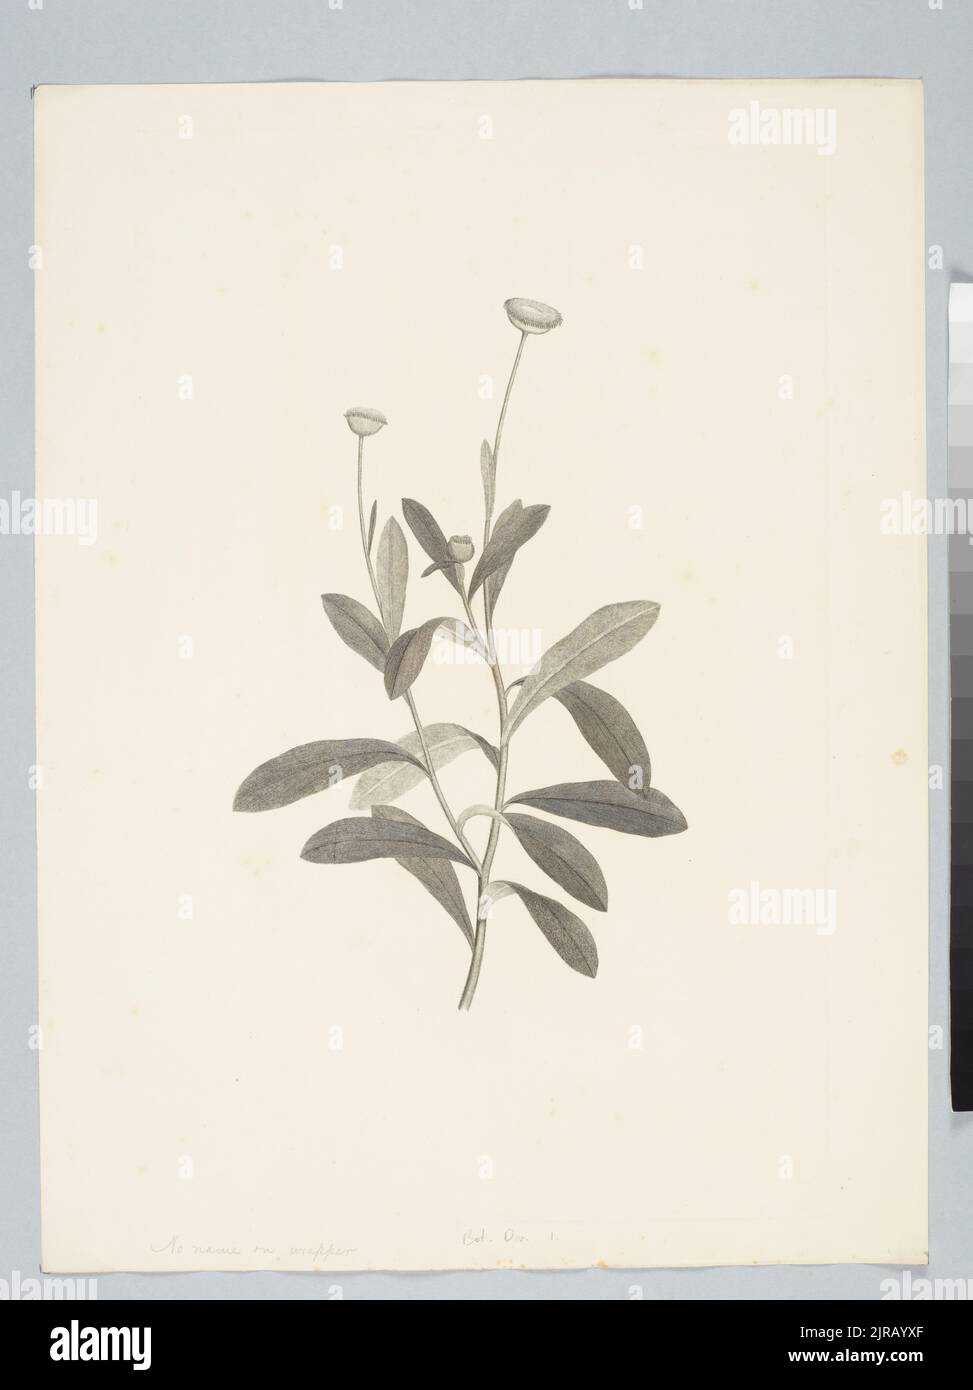 Helichrysum rupicola de Candolle, by Sydney Parkinson. Gift of the British Museum, 1895. Stock Photo